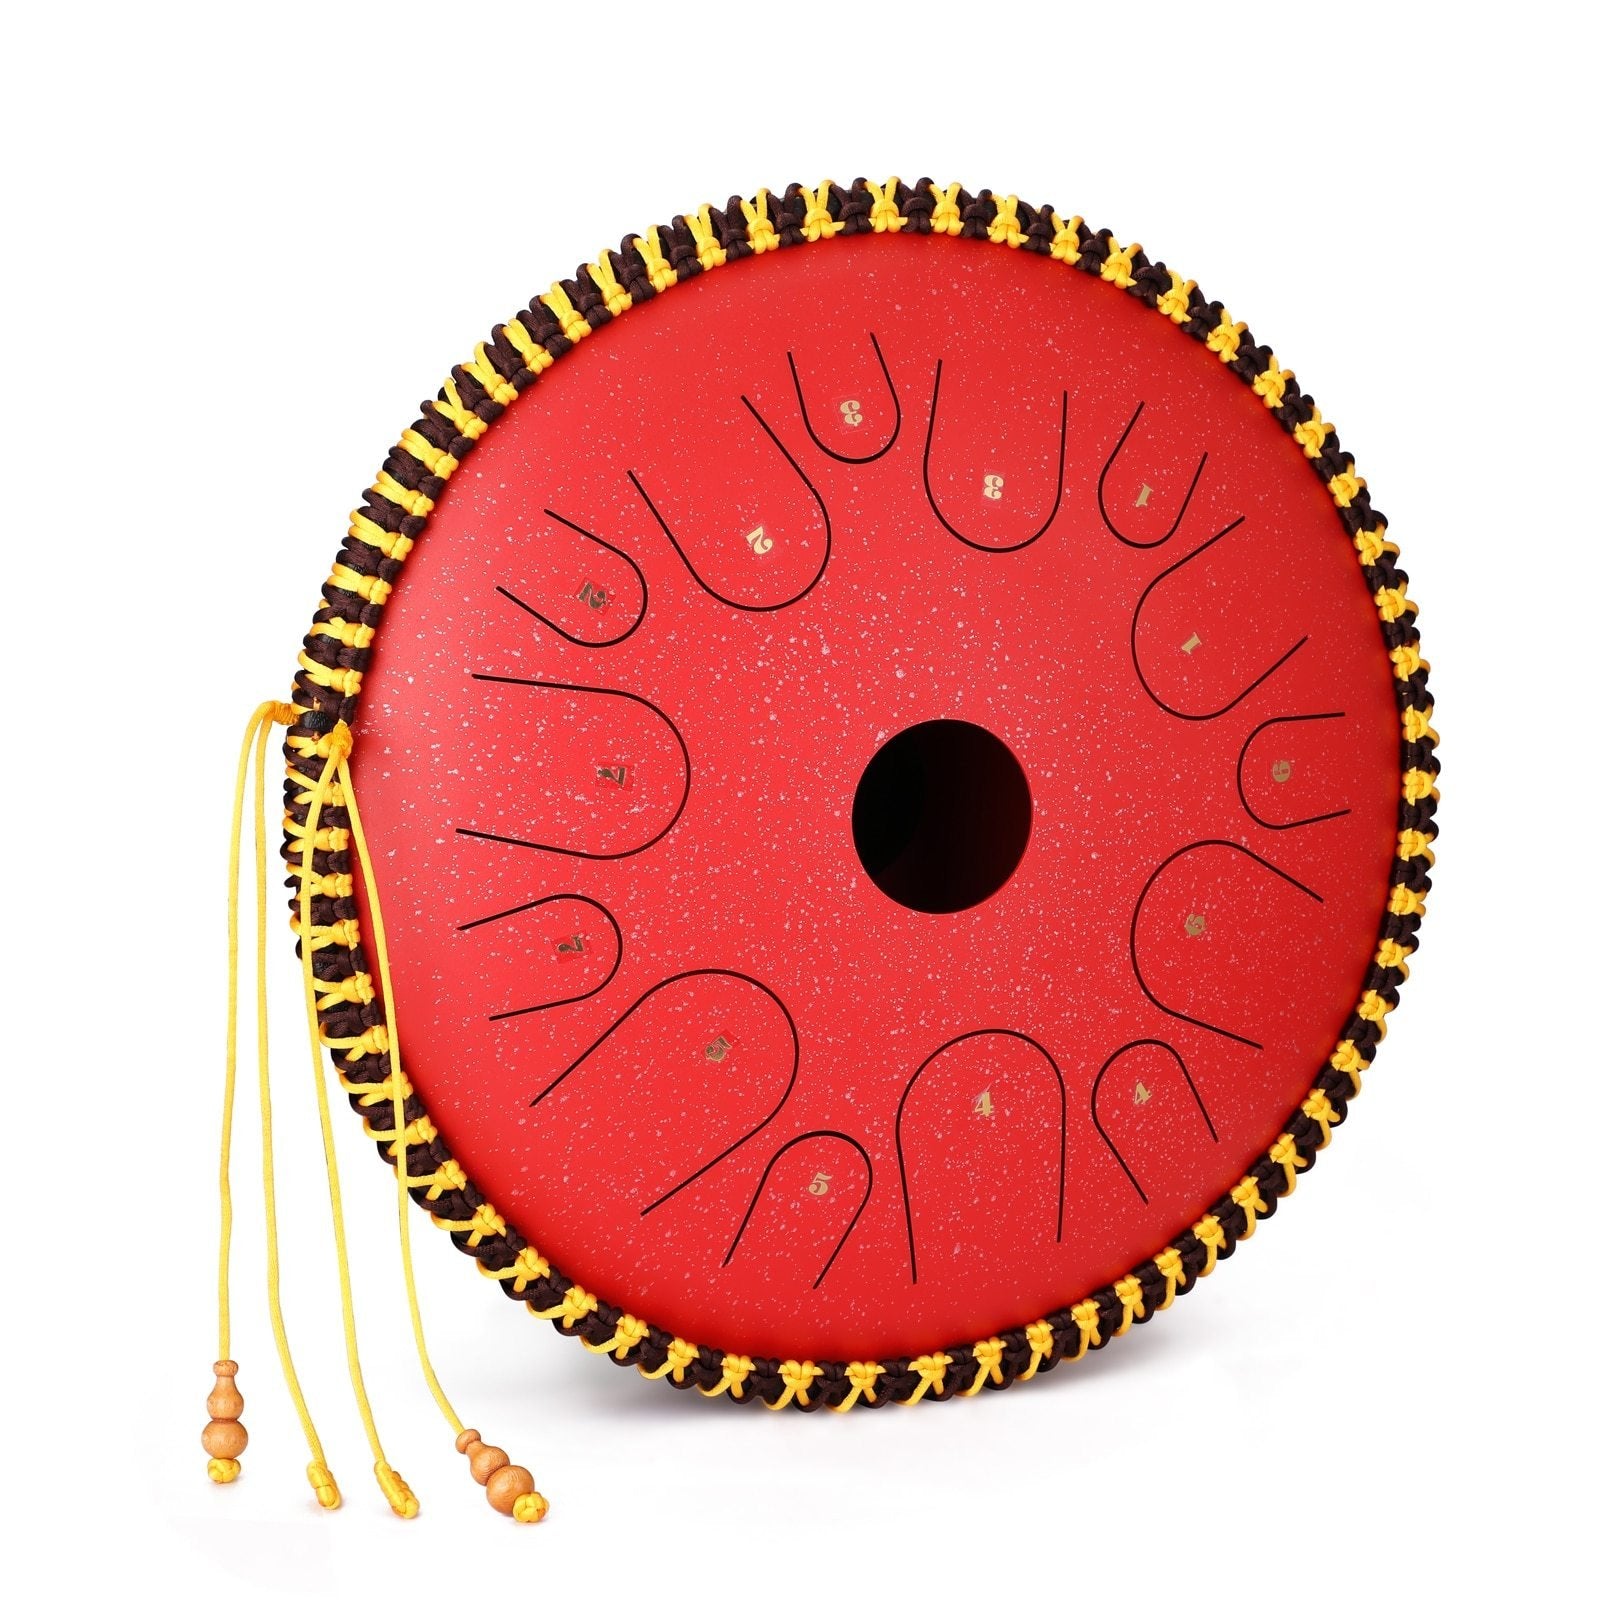 14 inch 14-Tone Carbon Steel Tongue Drum Hand Pan Drums with Drumsticks Percussion Musical Instruments - AKLOT